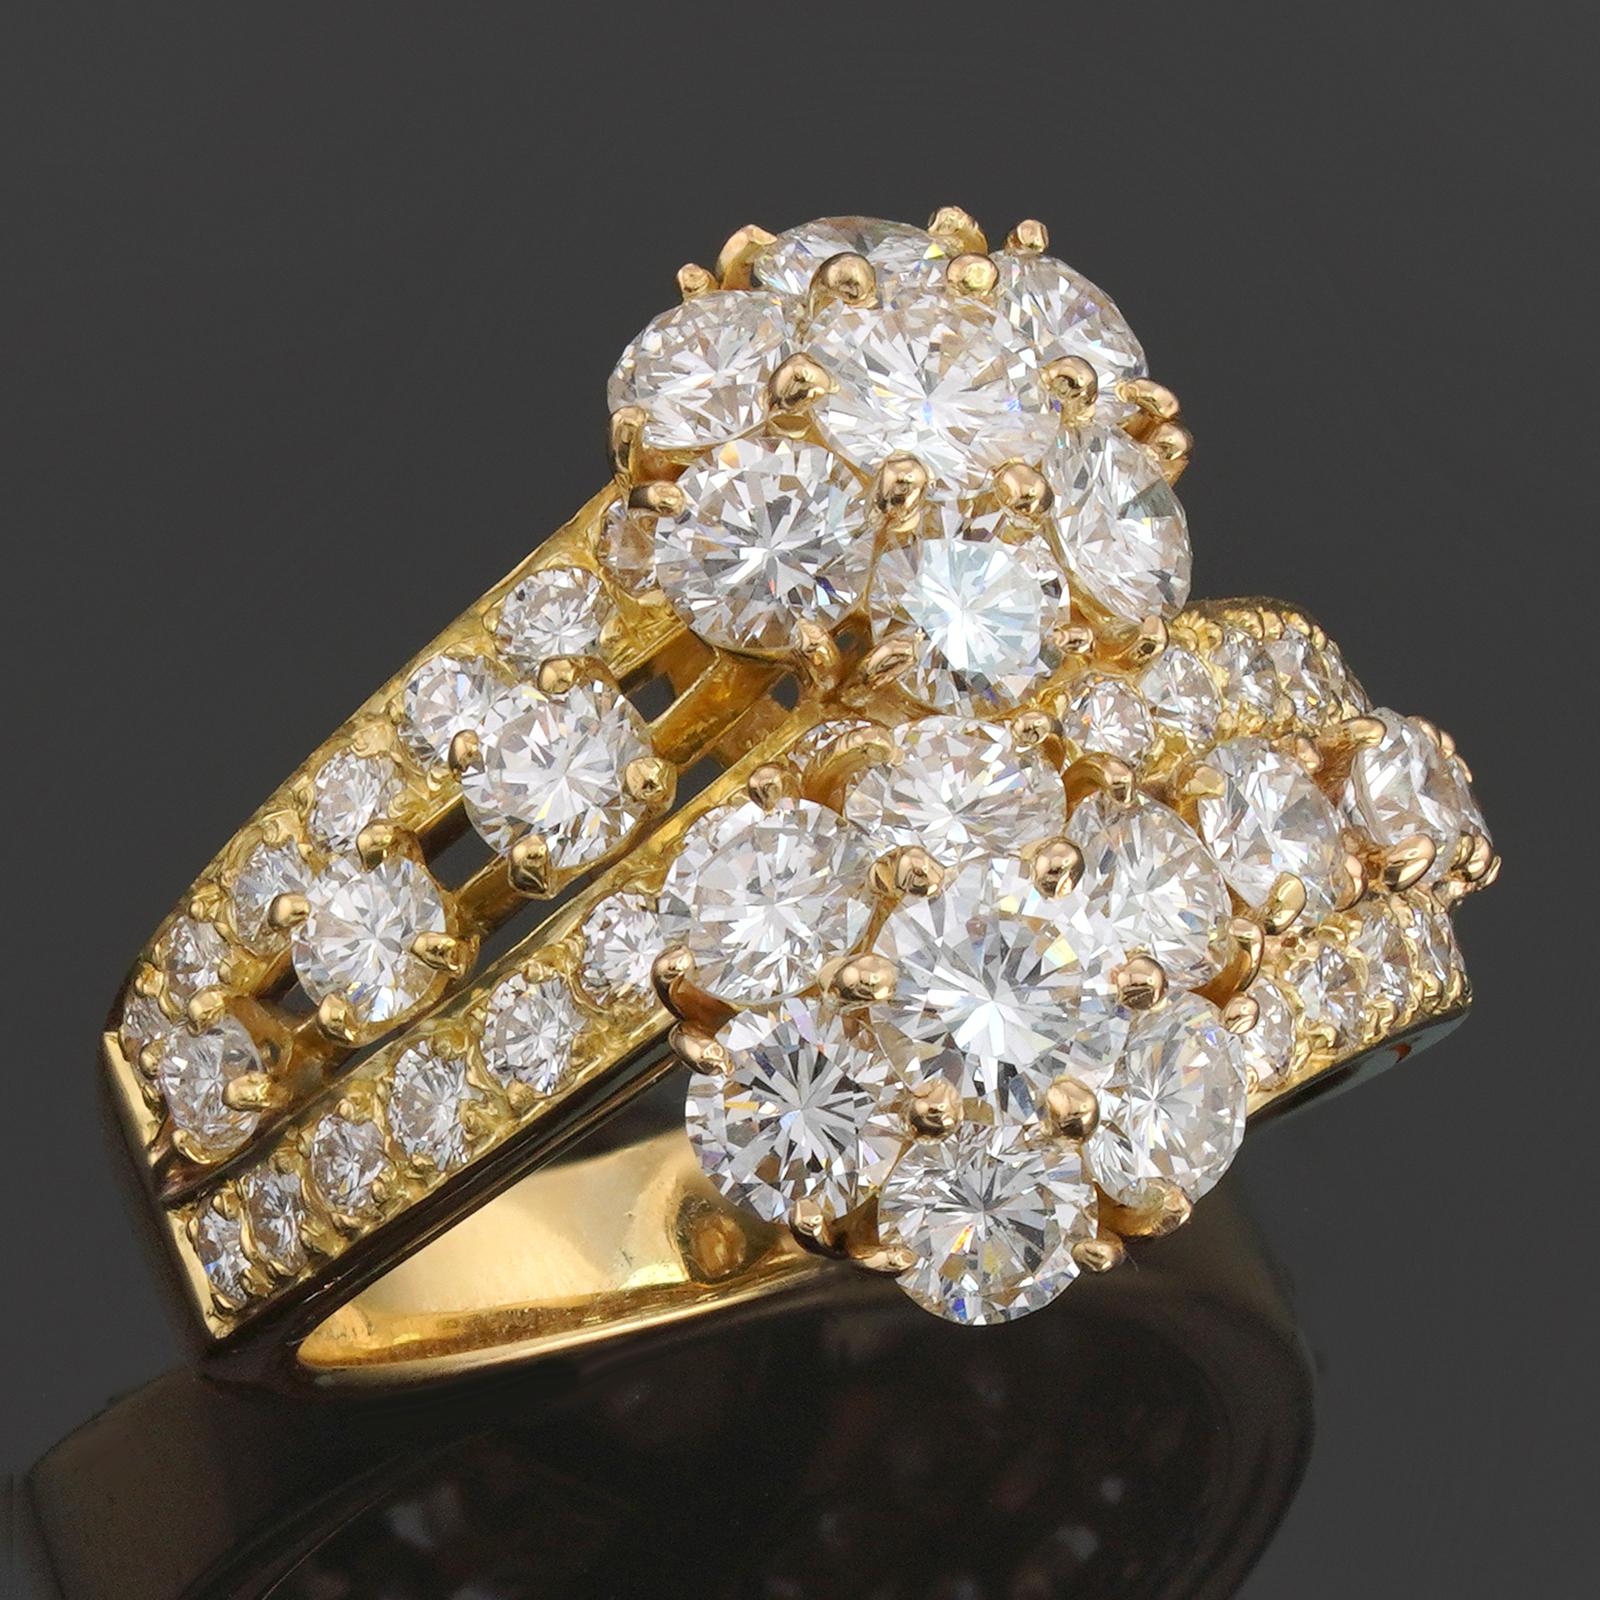 This exquisite authentic Van Cleef & Arpels Snowflake ring is crafted in 18k yellow gold and features with 50 round brilliant D-E-F VVS1-VVS2 diamonds weighing an estimated 3.0 carats. Made in France circa 1990s. Measurements: 0.70